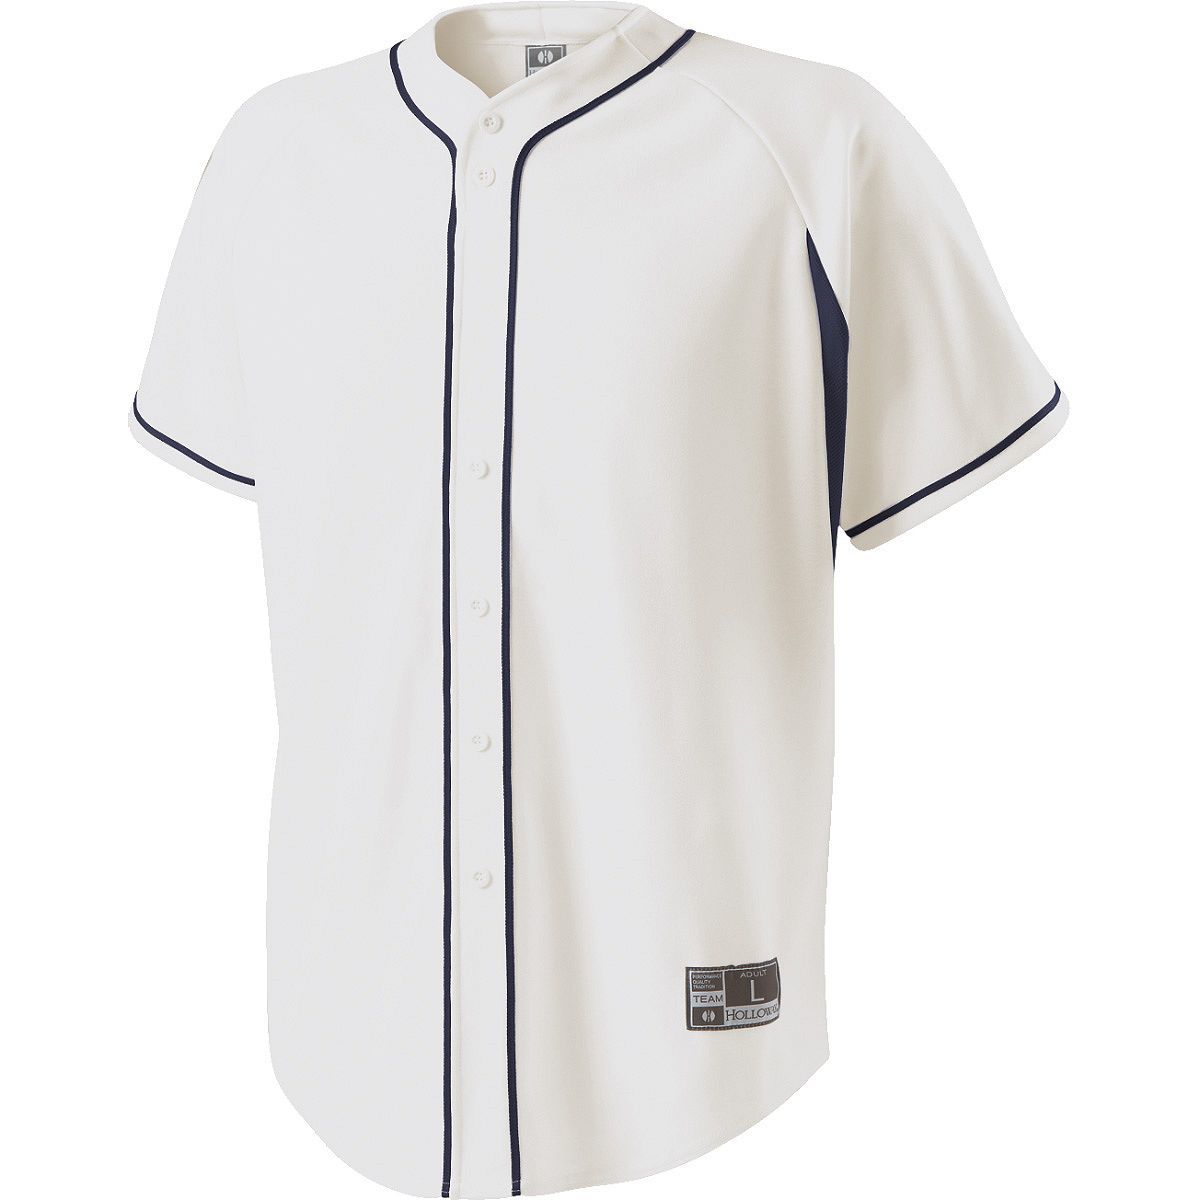 Holloway Youth Ignite Jersey in White/Navy  -Part of the Youth, Youth-Jersey, Baseball, Holloway, Shirts, All-Sports, All-Sports-1 product lines at KanaleyCreations.com